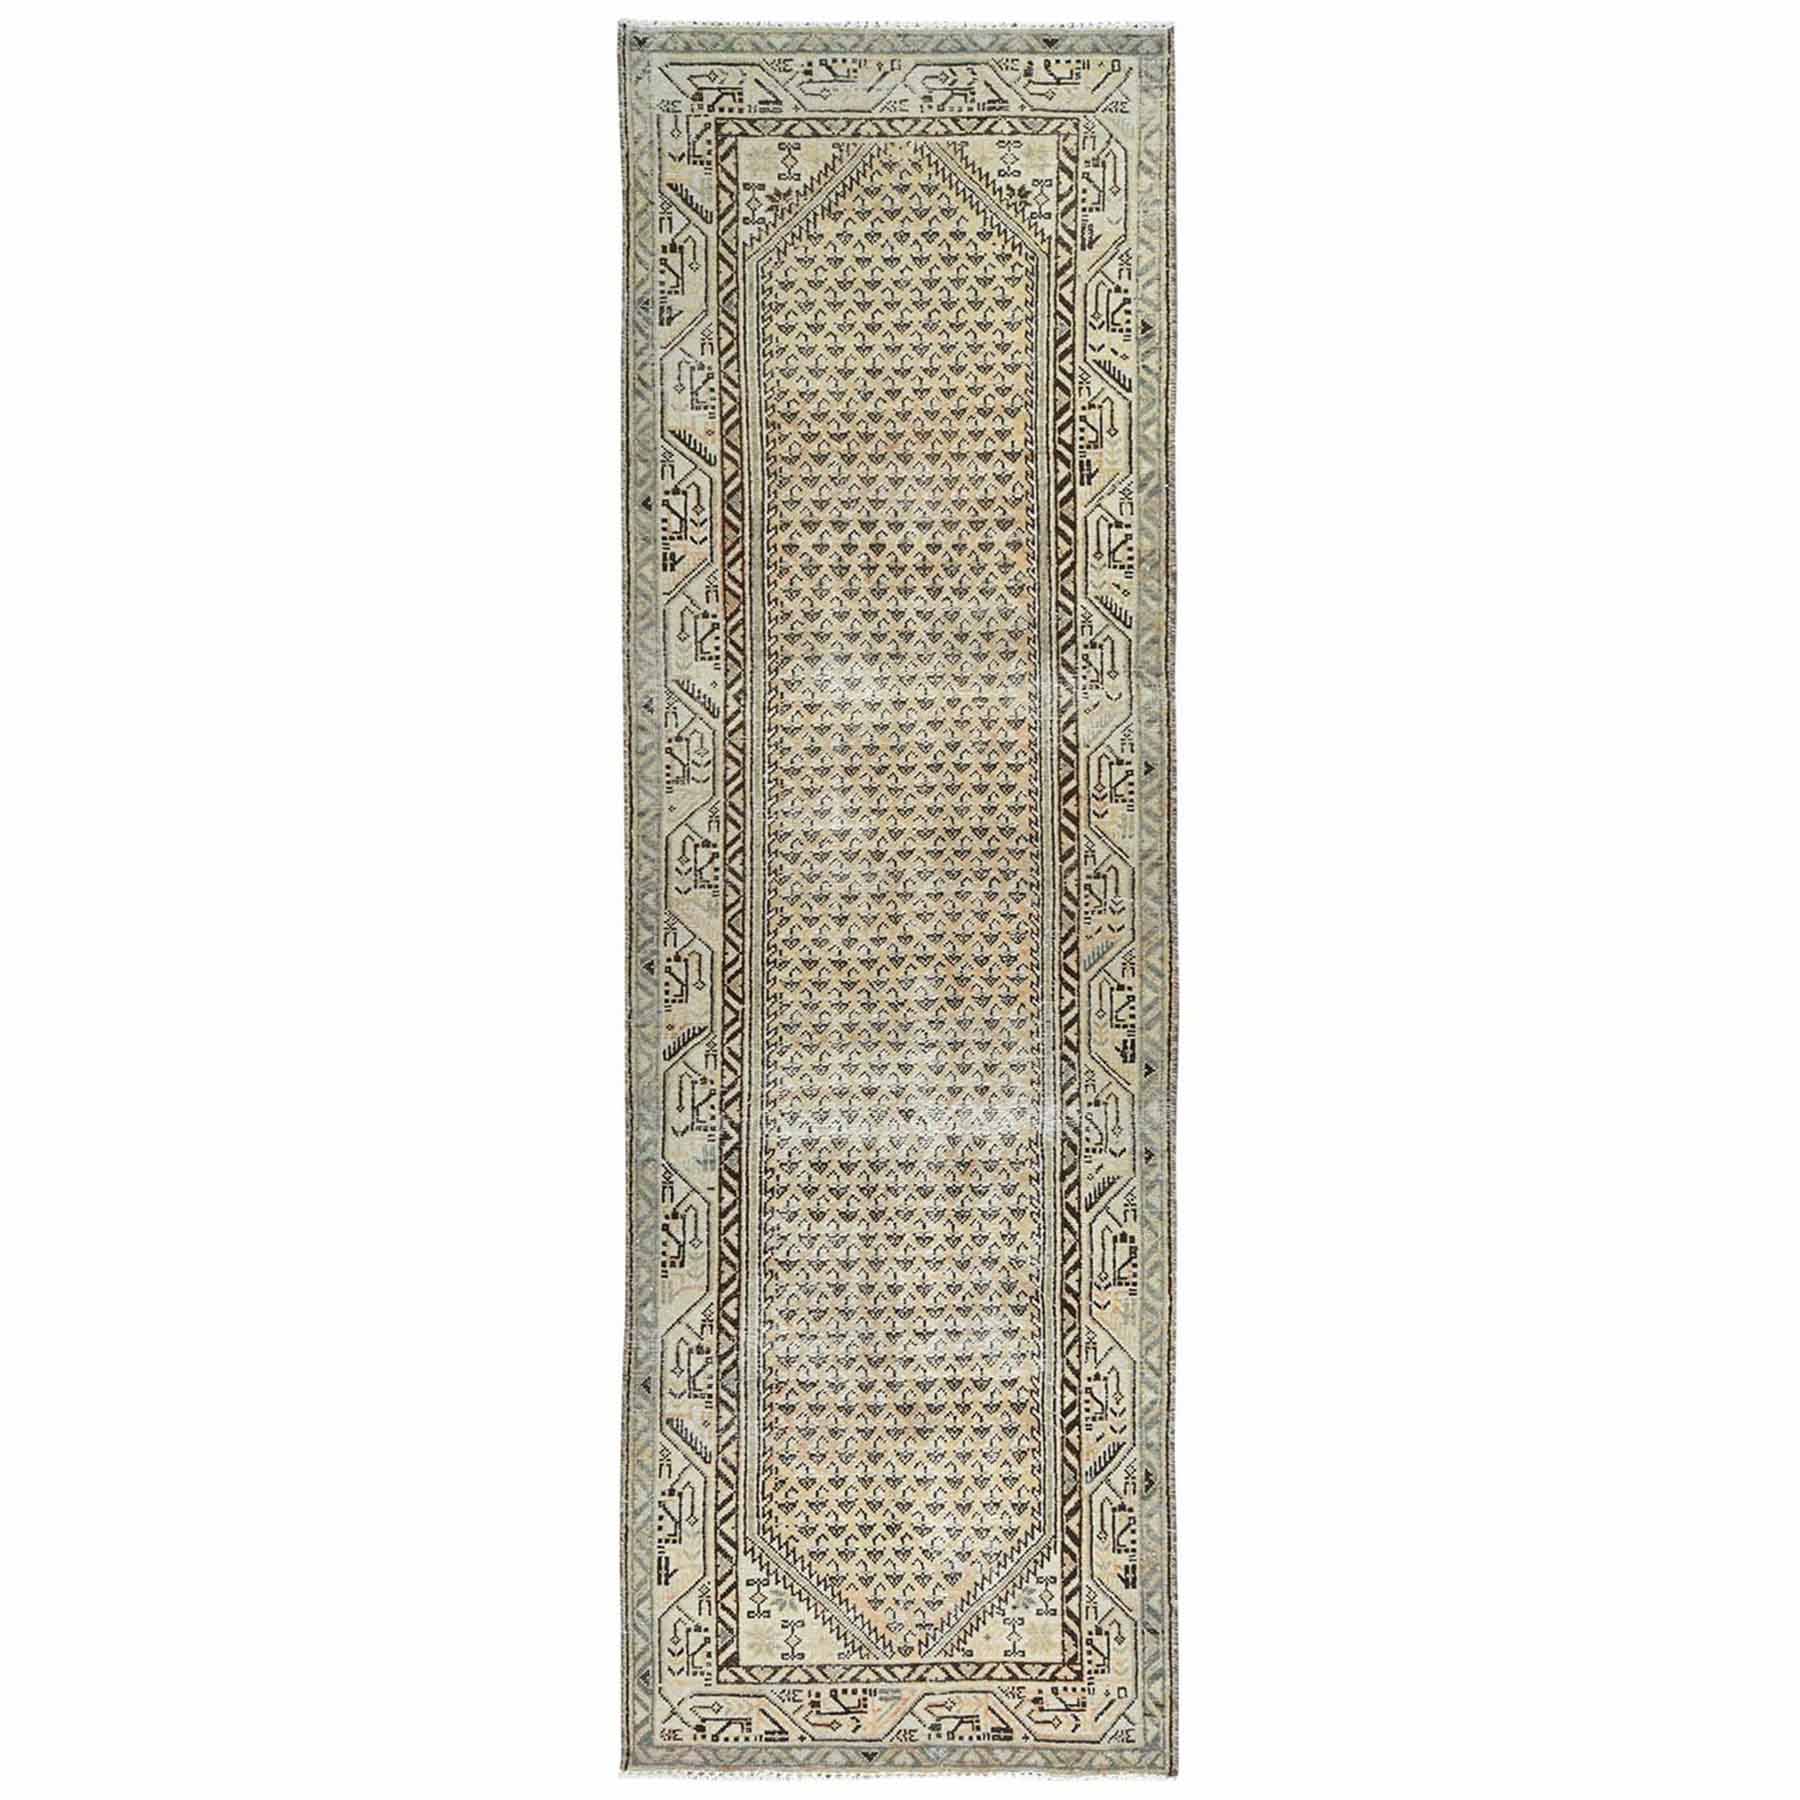 Wheat Color, Bohemian Vintage Persian Sarouk Mir with Small Repetitive Boteh Design, Worn Down, Clean, Hand Knotted Pure Wool Wide Runner Oriental 